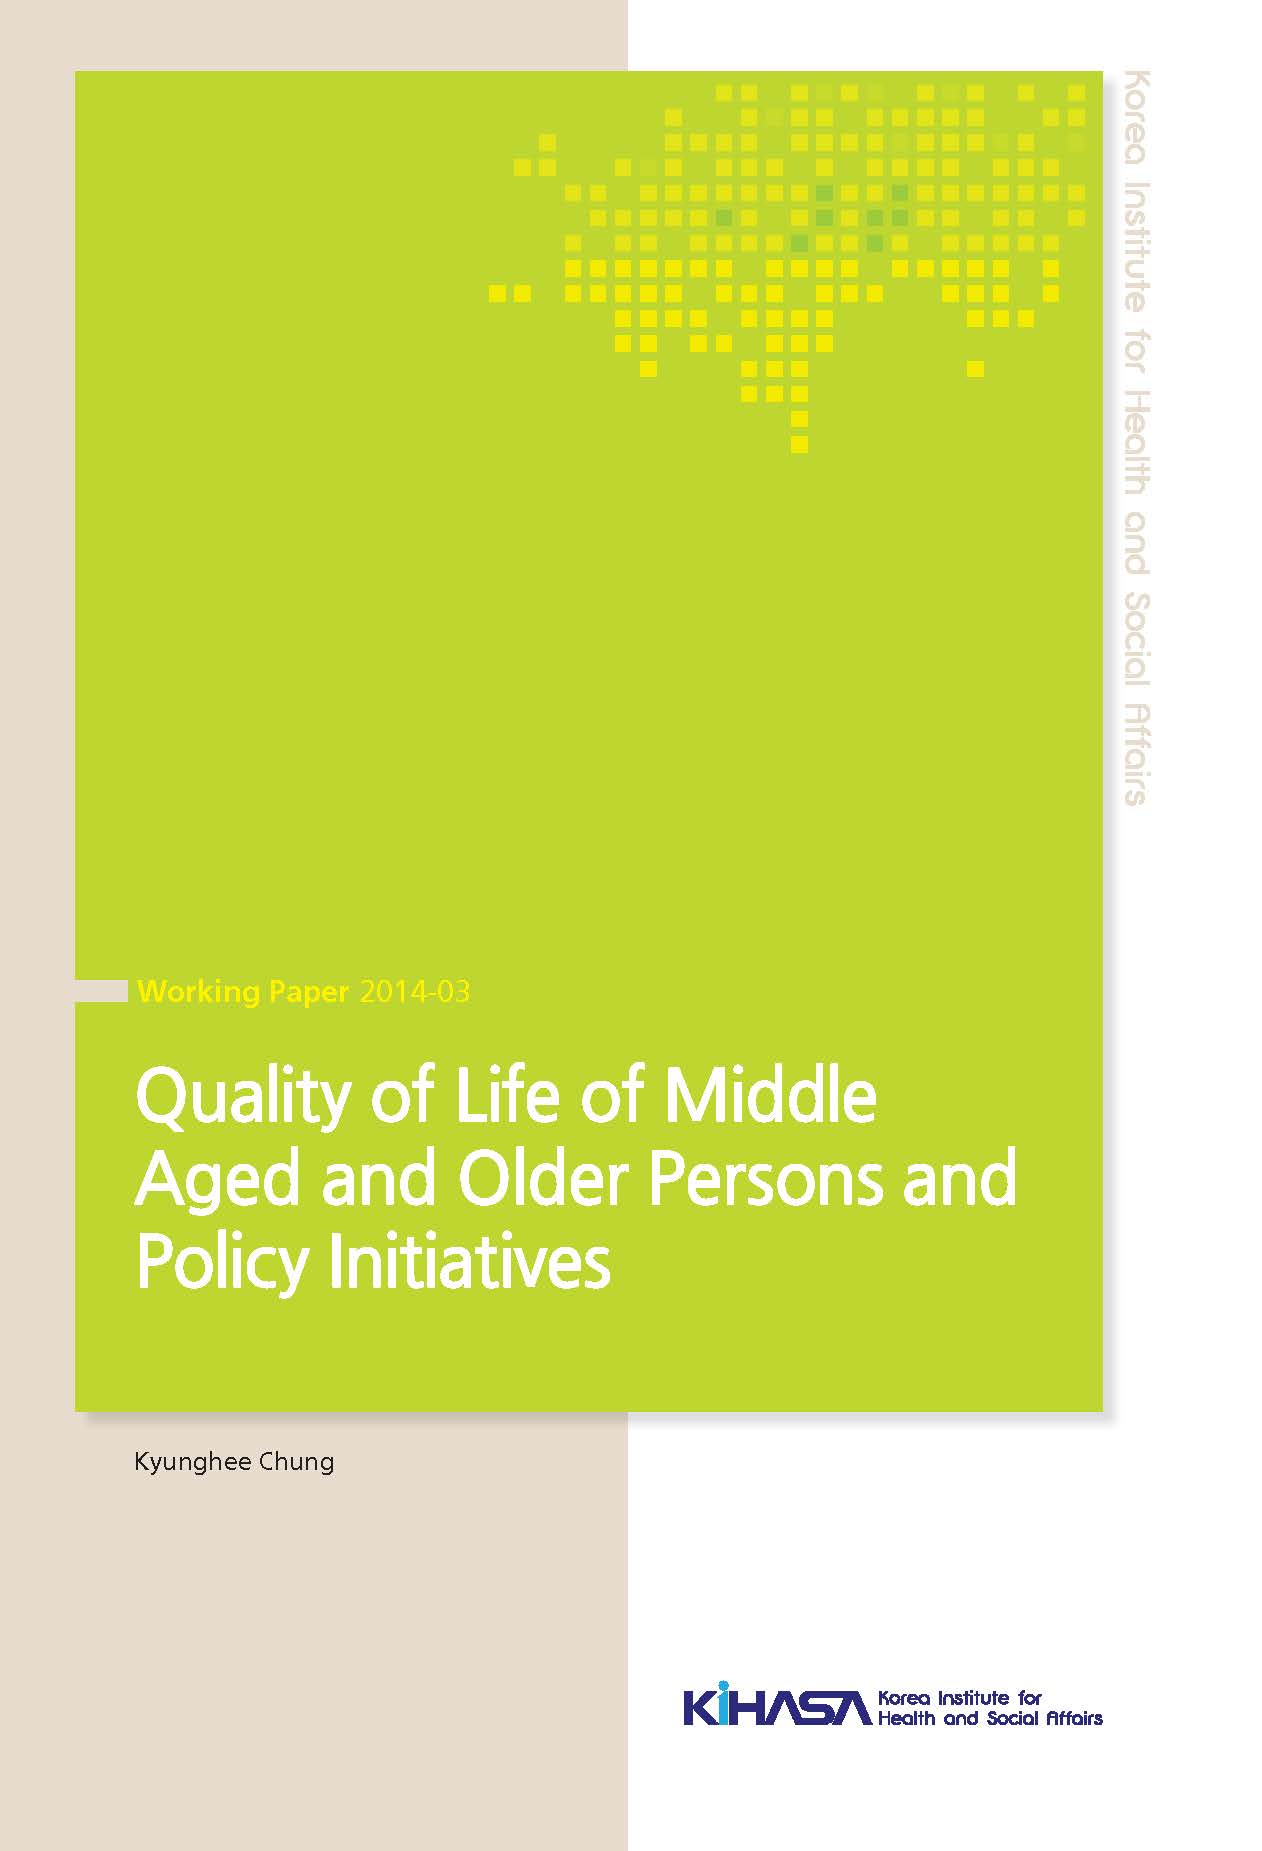 Quality of Life of Middle Aged and Older Persons and Policy Initiatives